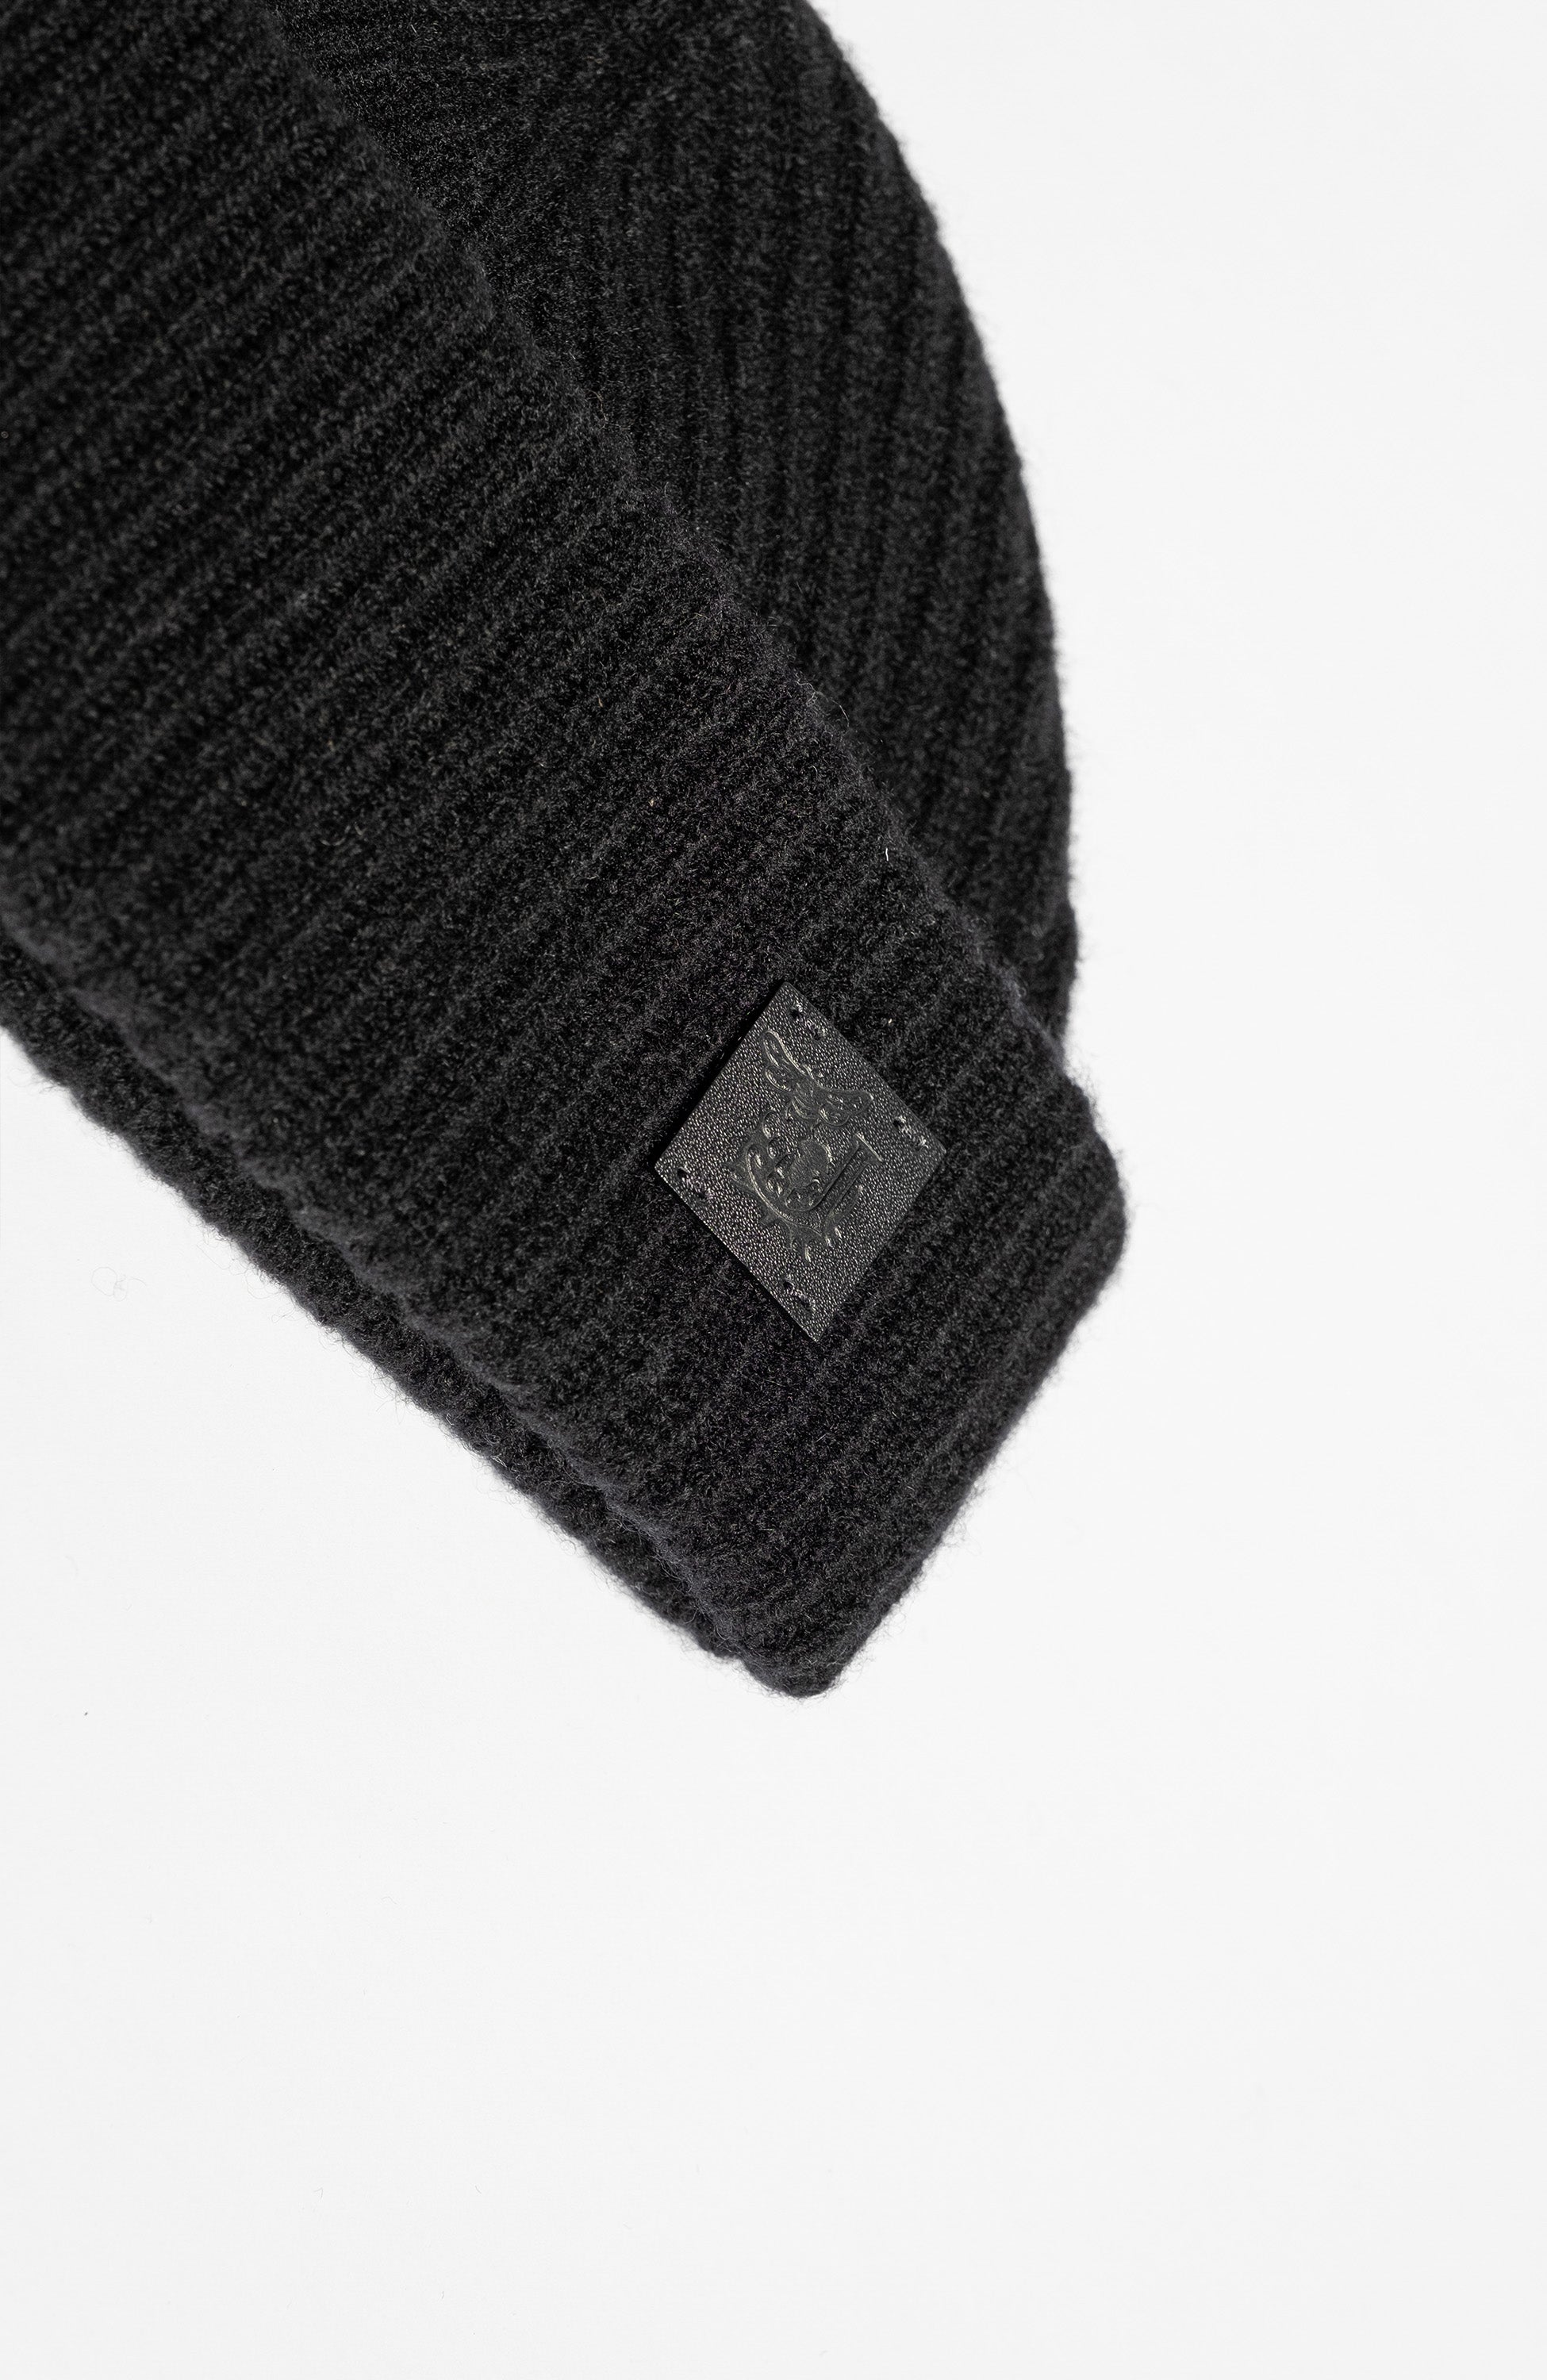 Wool blend ribbed hat